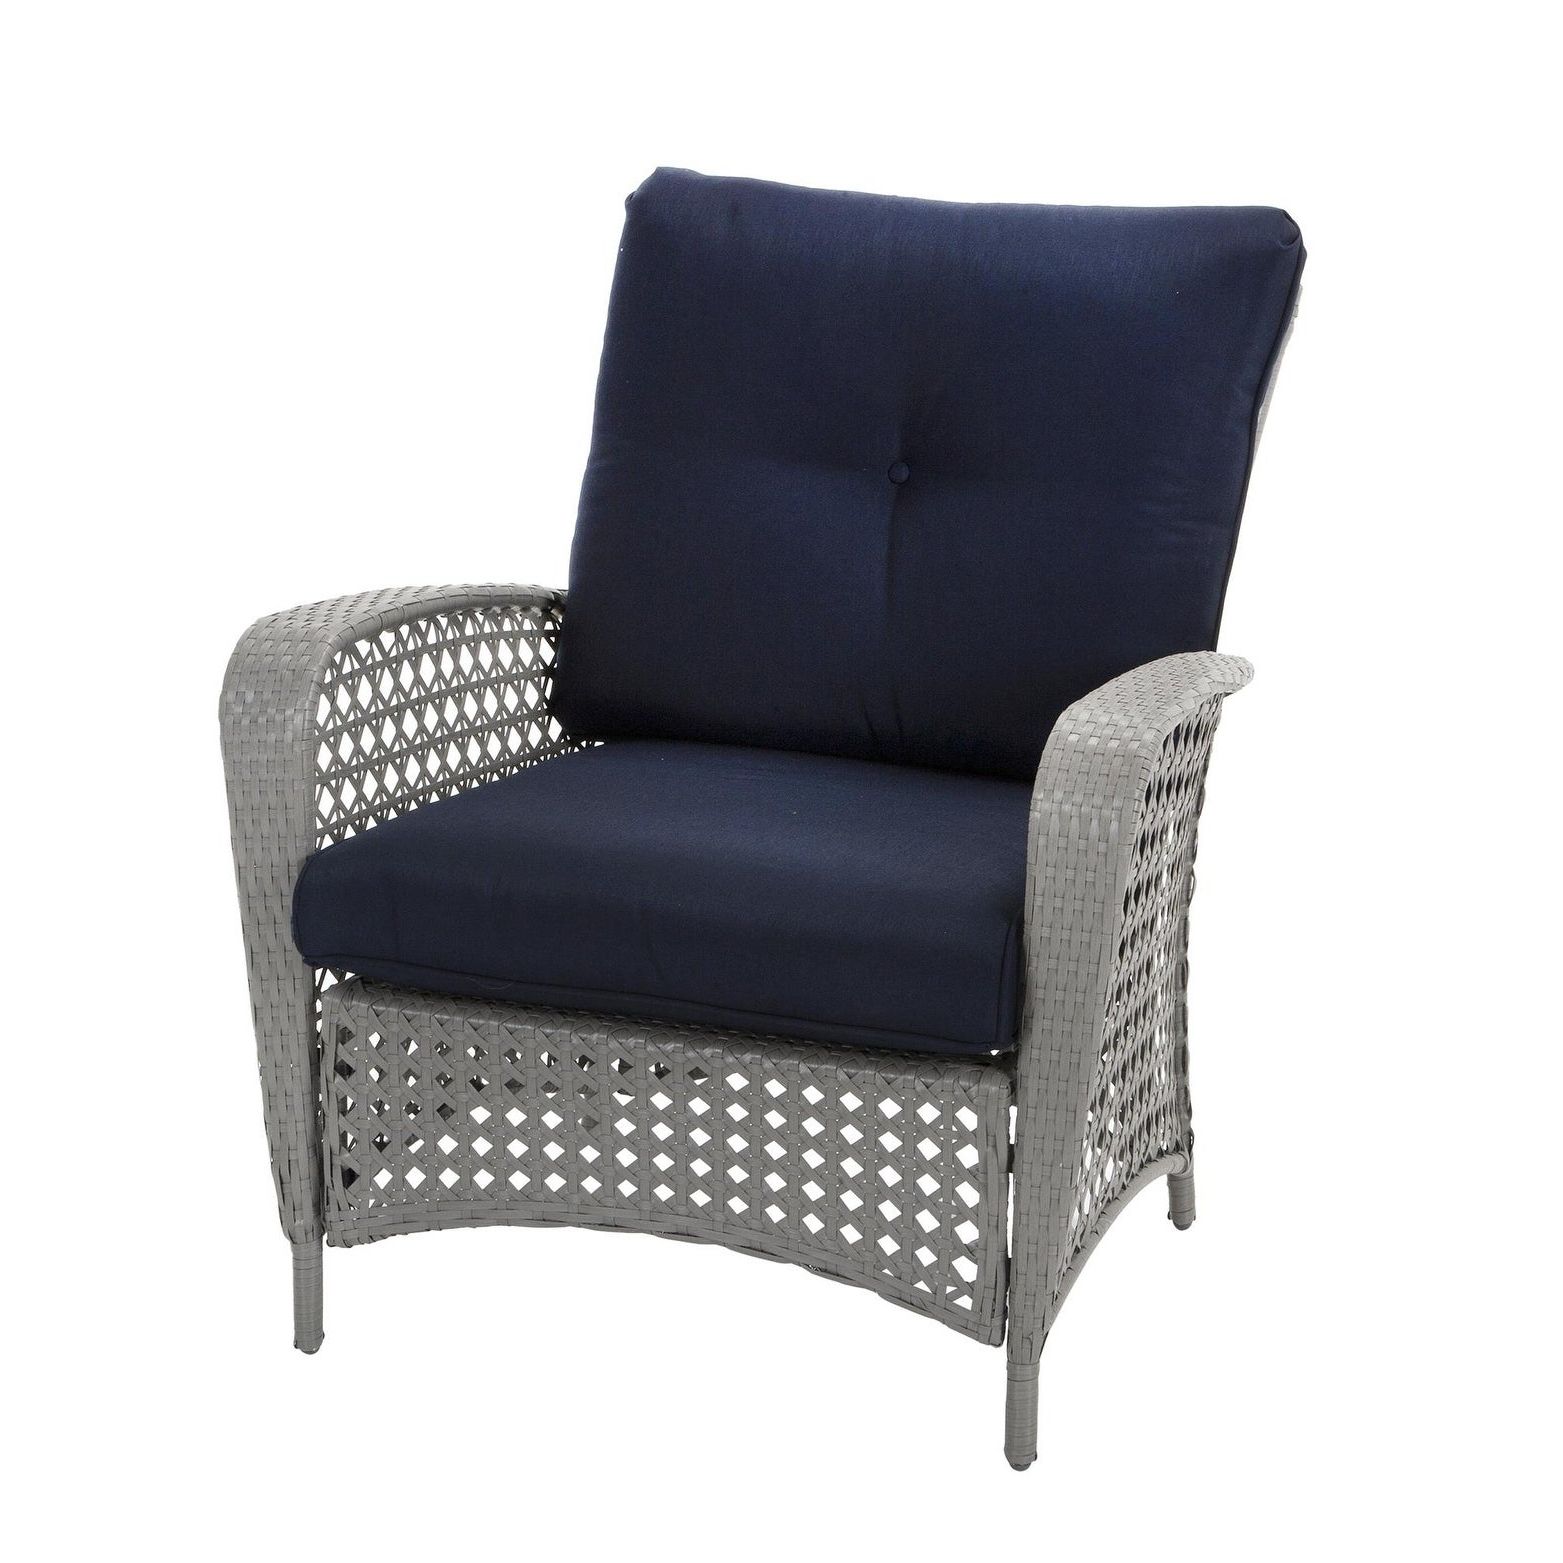 Newest Cosco Outdoor Steel Woven Wicker Chaise Lounge Chairs Regarding Cosco Outdoor Living Lakewood Ranch Steel Woven Wicker Lounge Chairs With  Cushions (set Of 2 Chairs) (View 2 of 25)